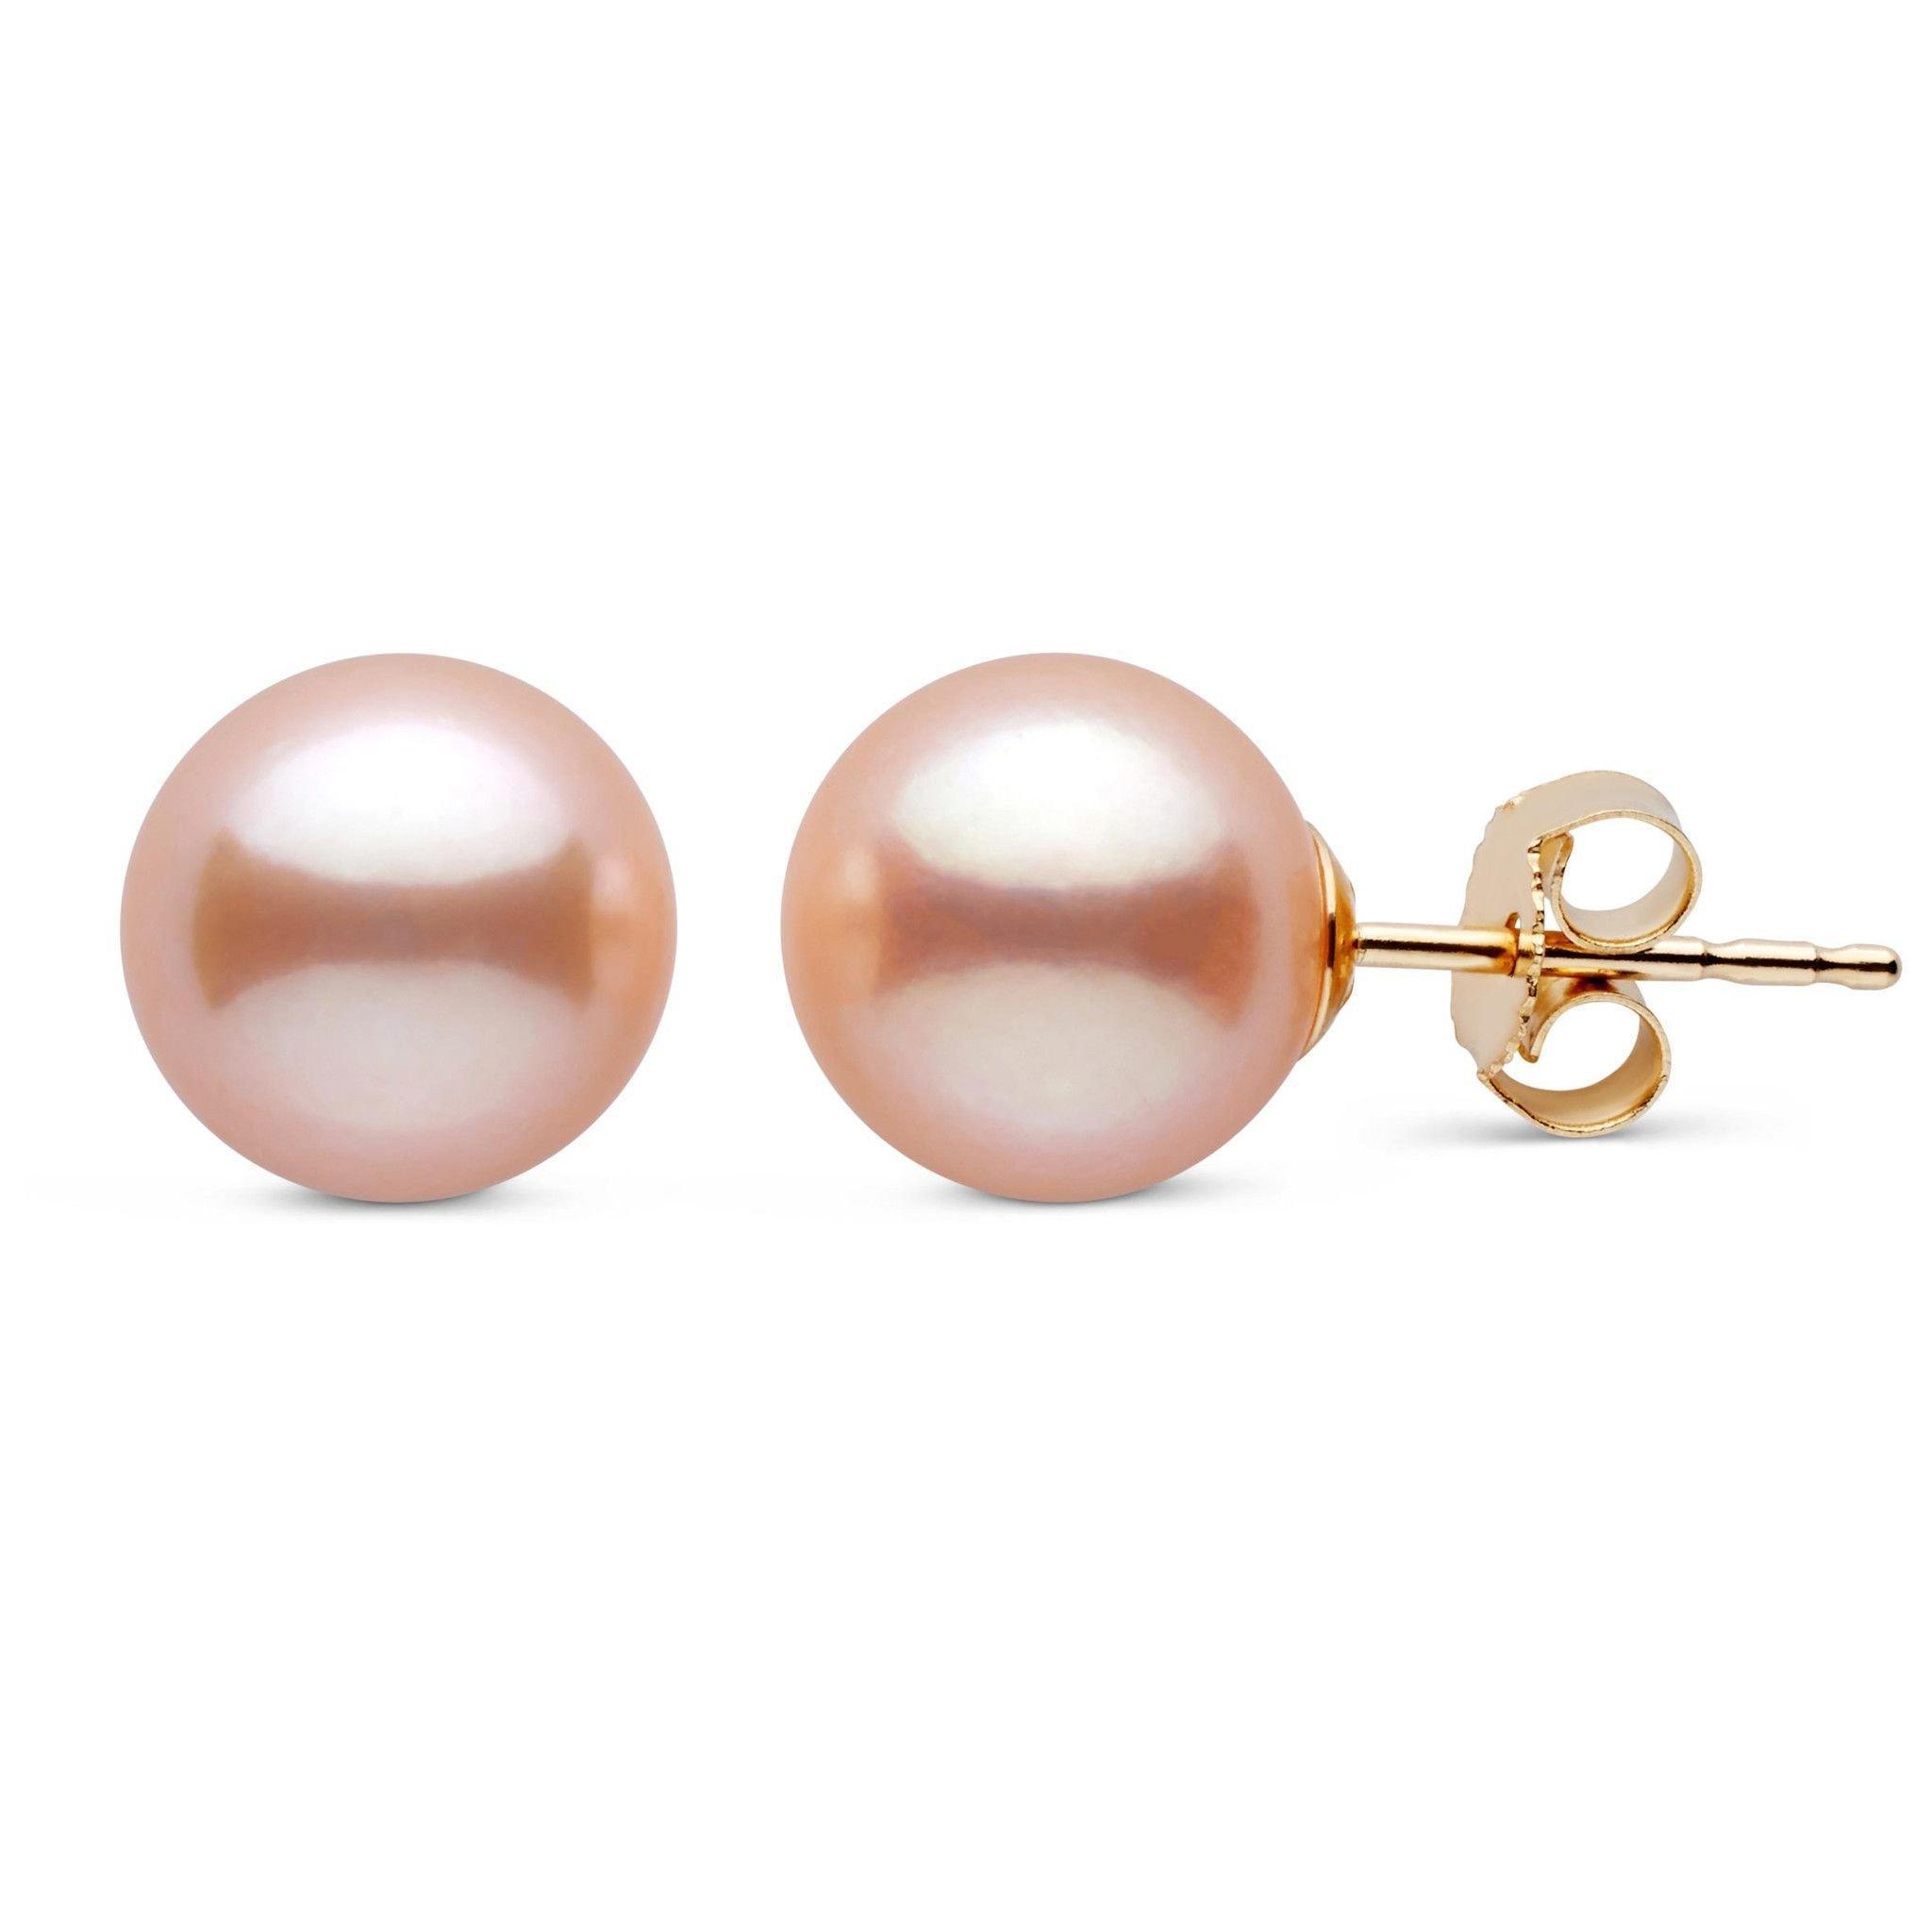 8.5-9.0 mm Pink to Peach Freshadama Freshwater Pearl Stud Earrings yellow gold